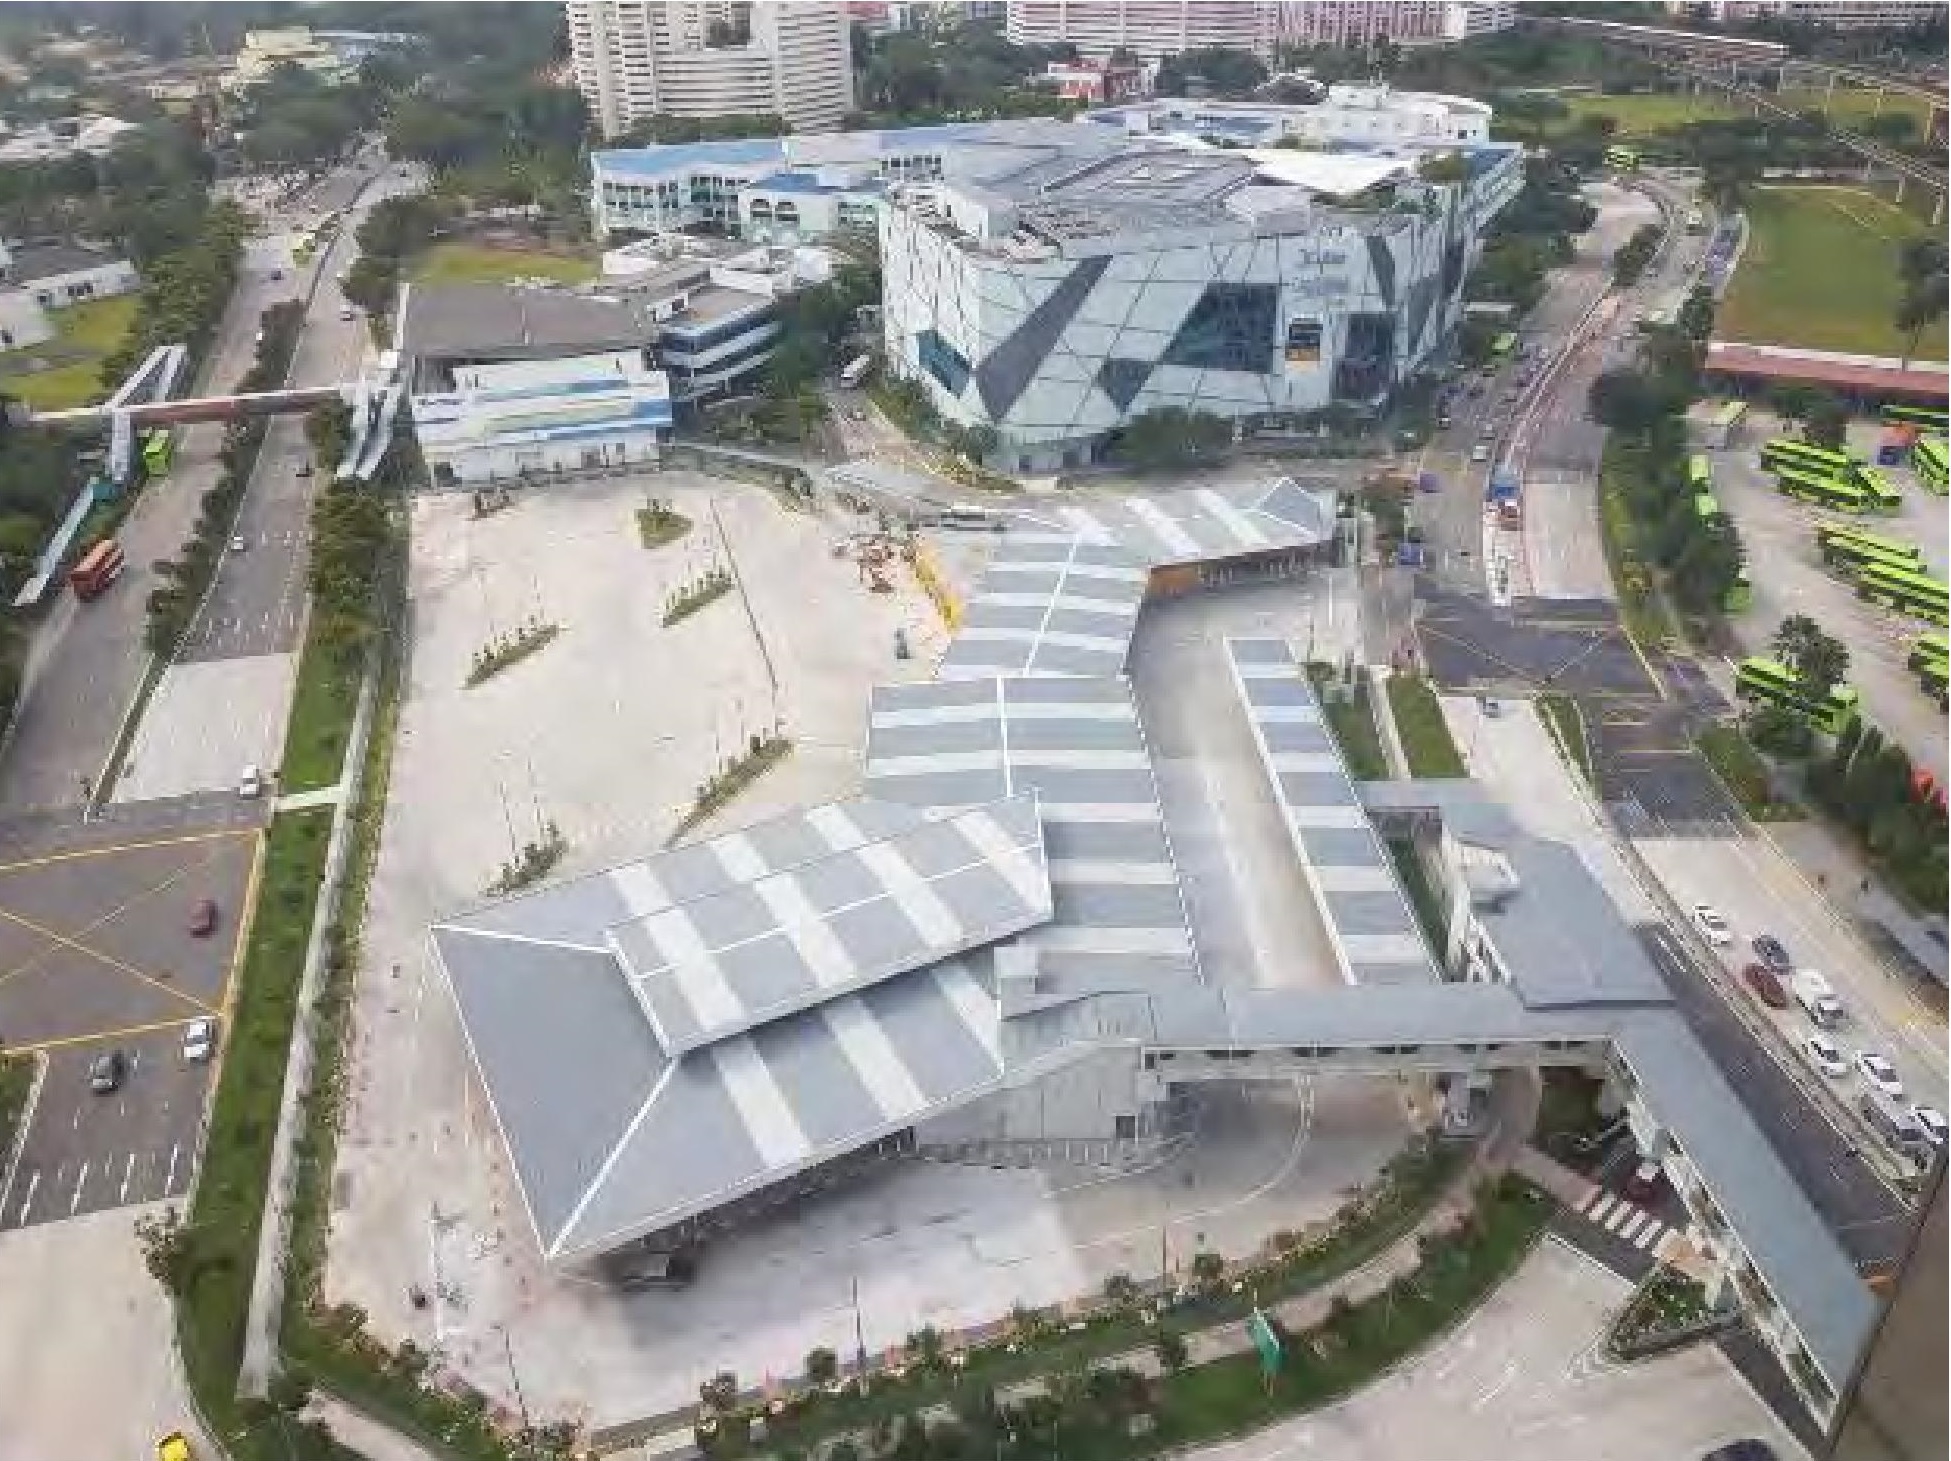 Relocated Jurong East Bus Interchange: Overhead view (Photo: Land Transport Authority)